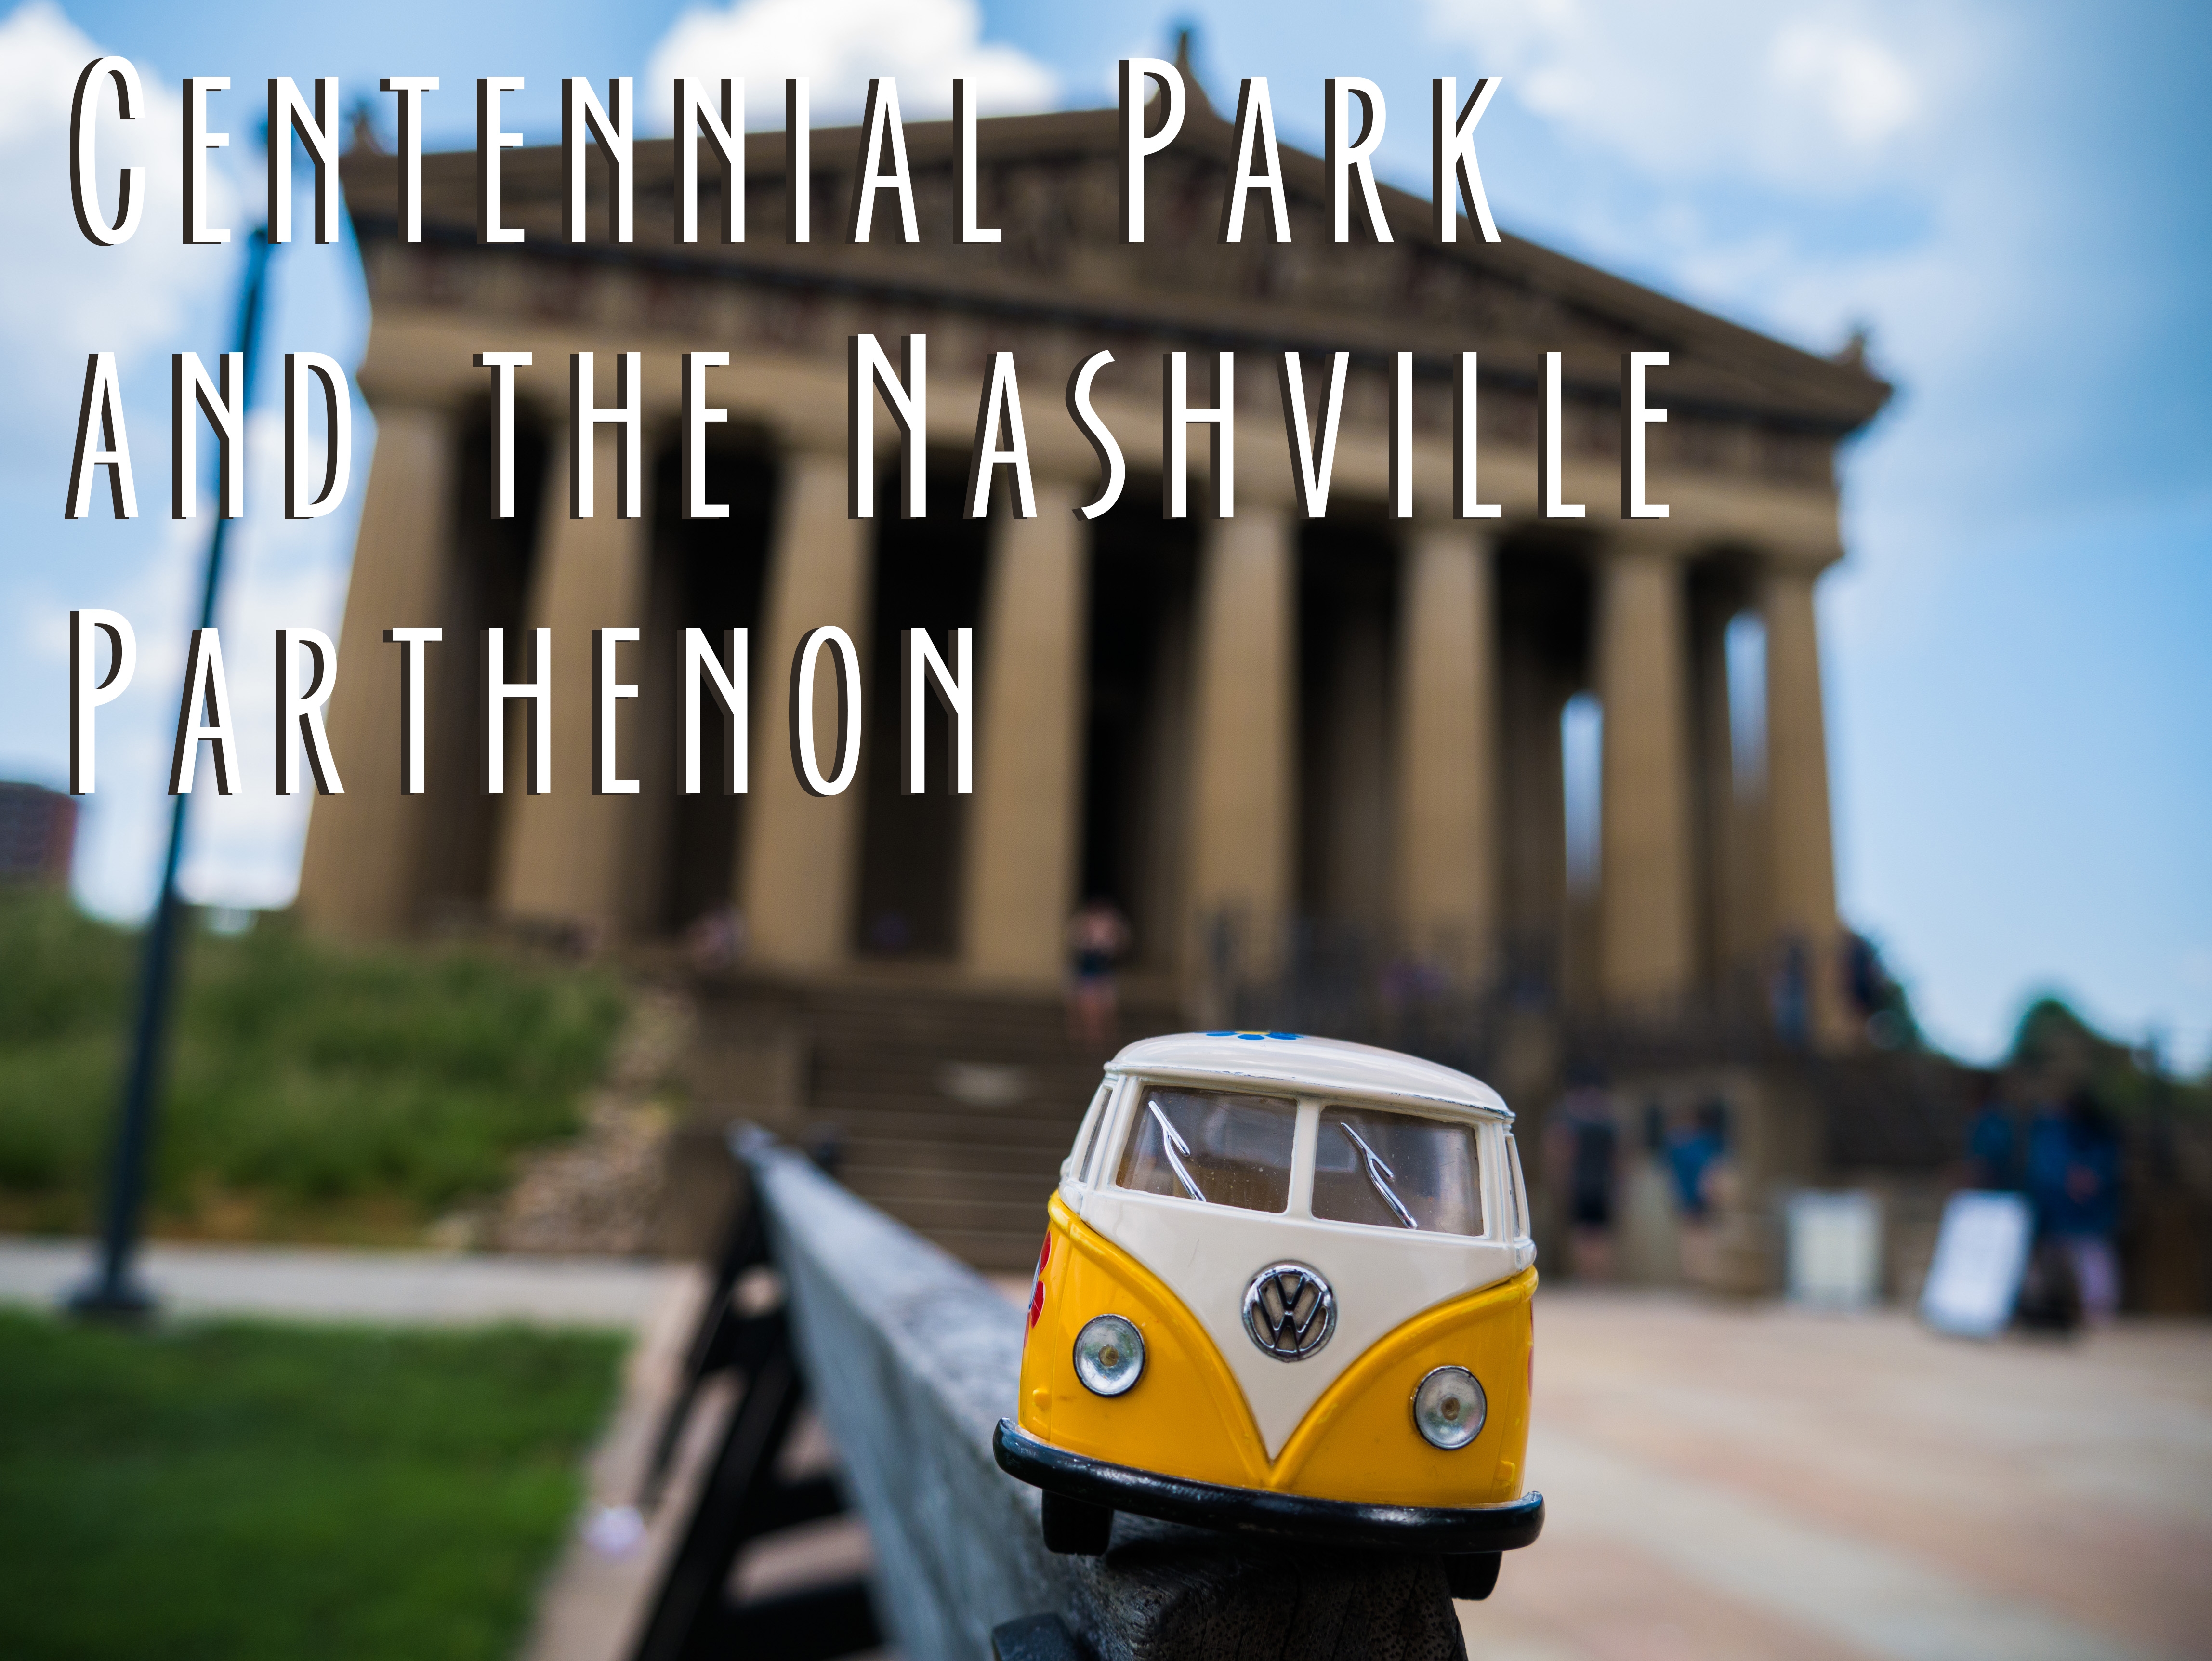 Title card showing the yellow van at the Nashville Parthenon with the words centennial park and the nashville parthenon